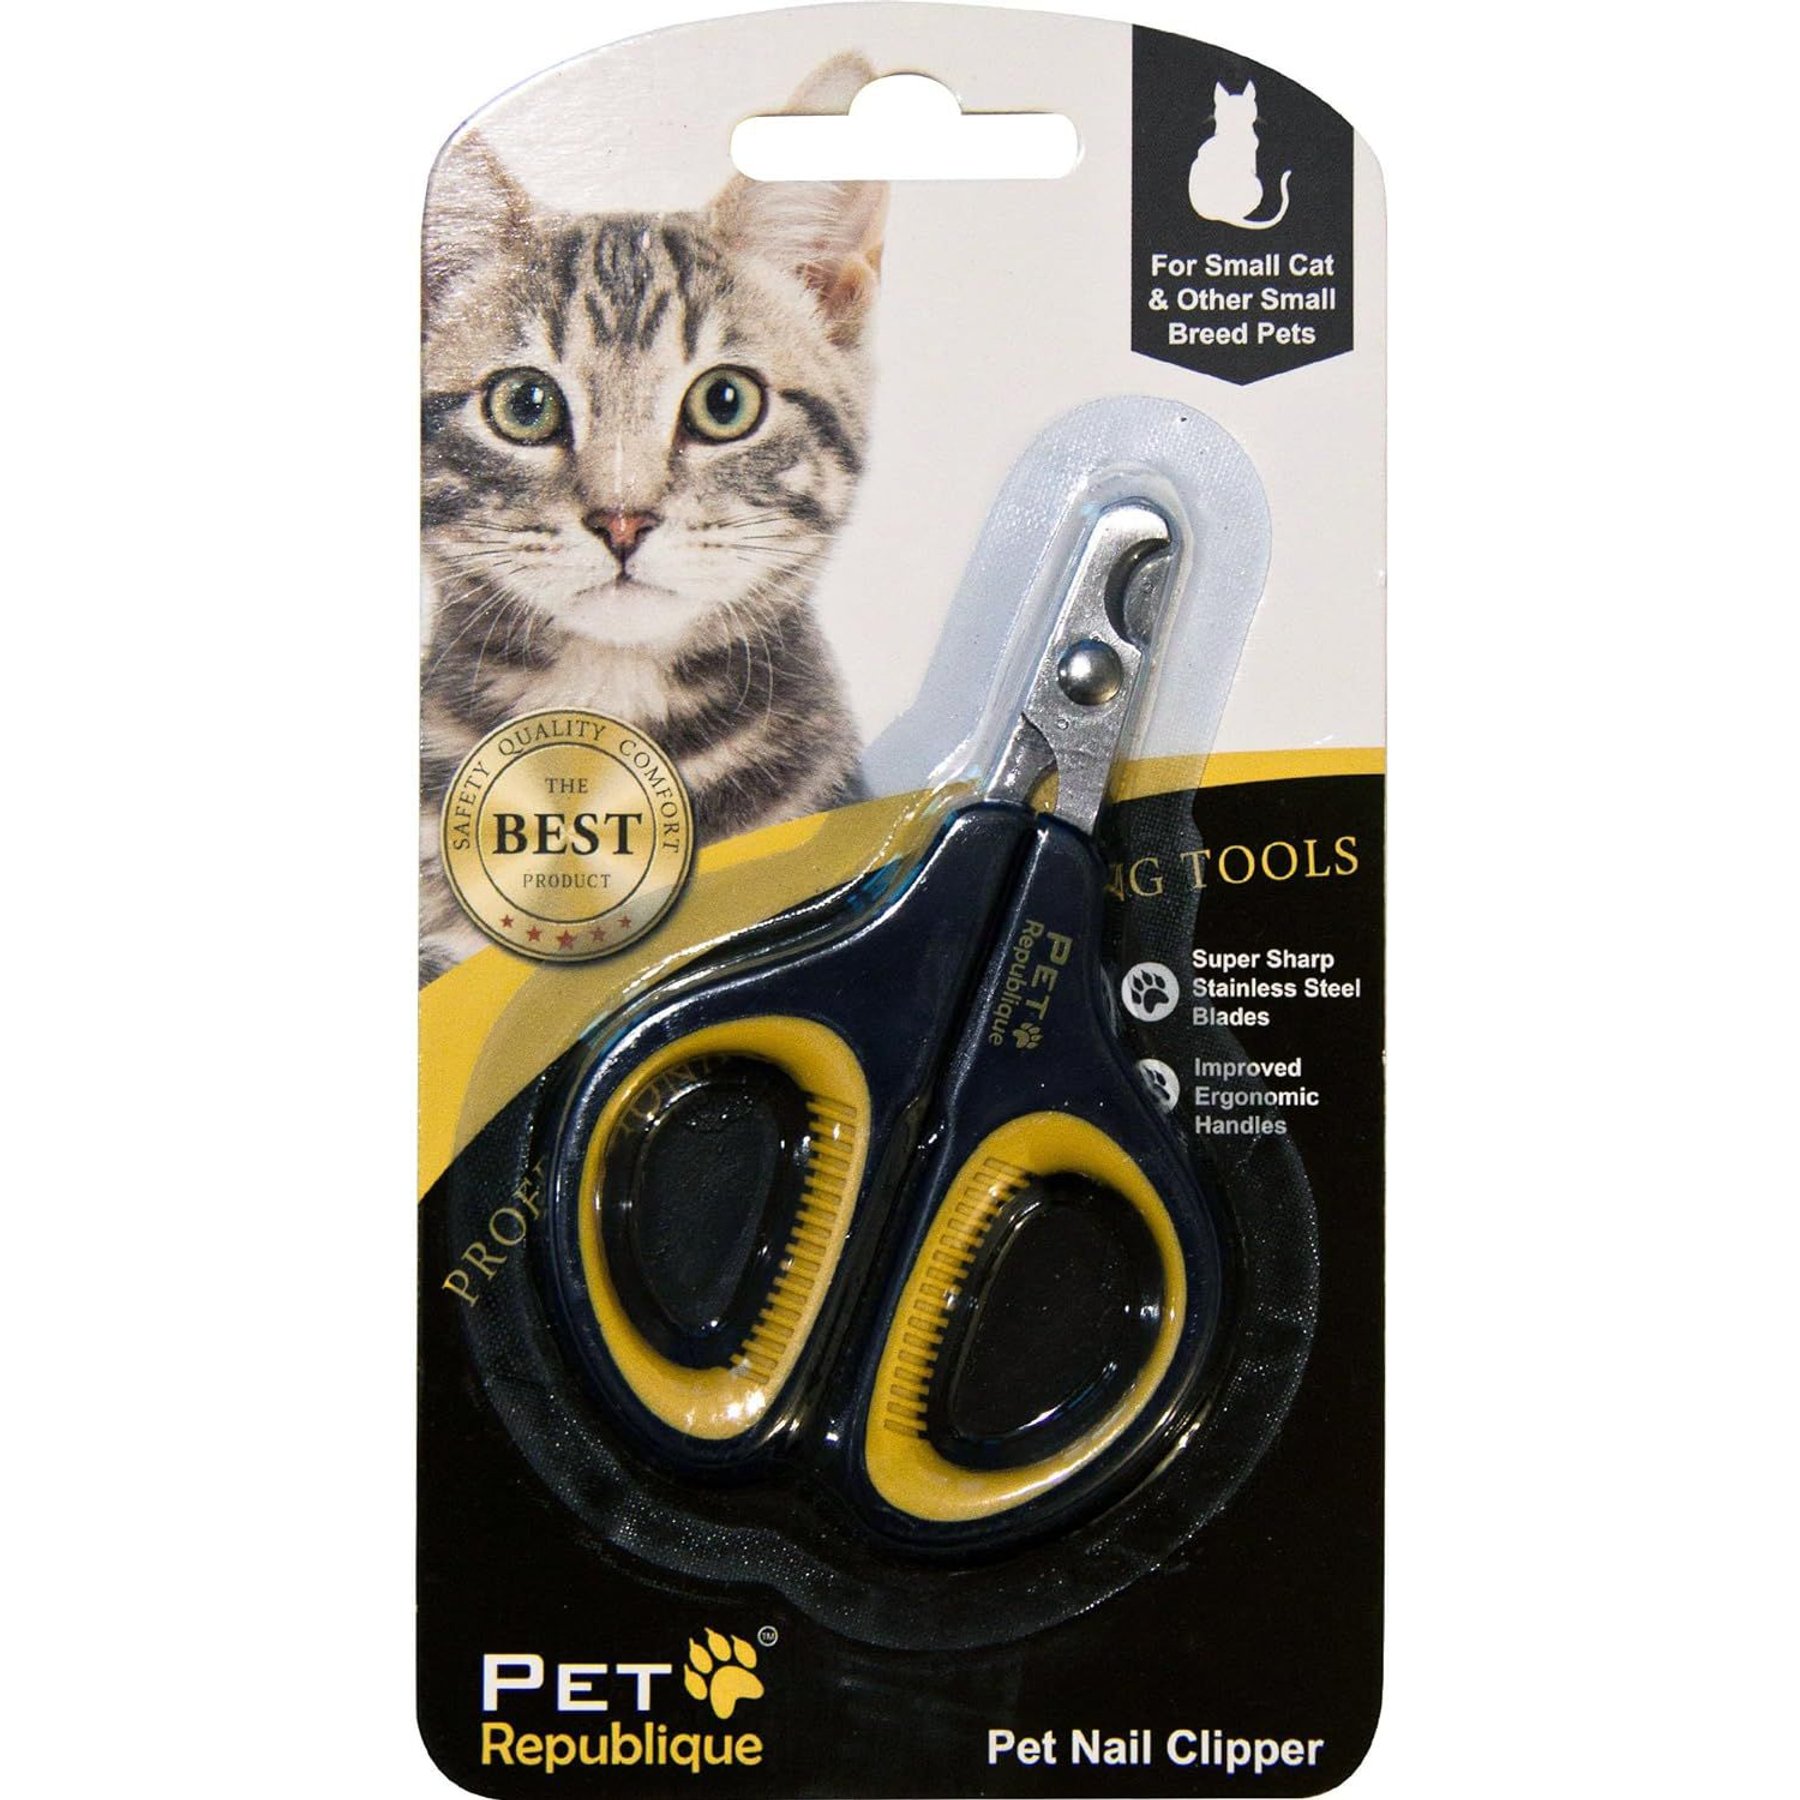 Stainless Steel Blade Nail-Clippers with Safety Guard Pets Supplies for  Parrots | eBay